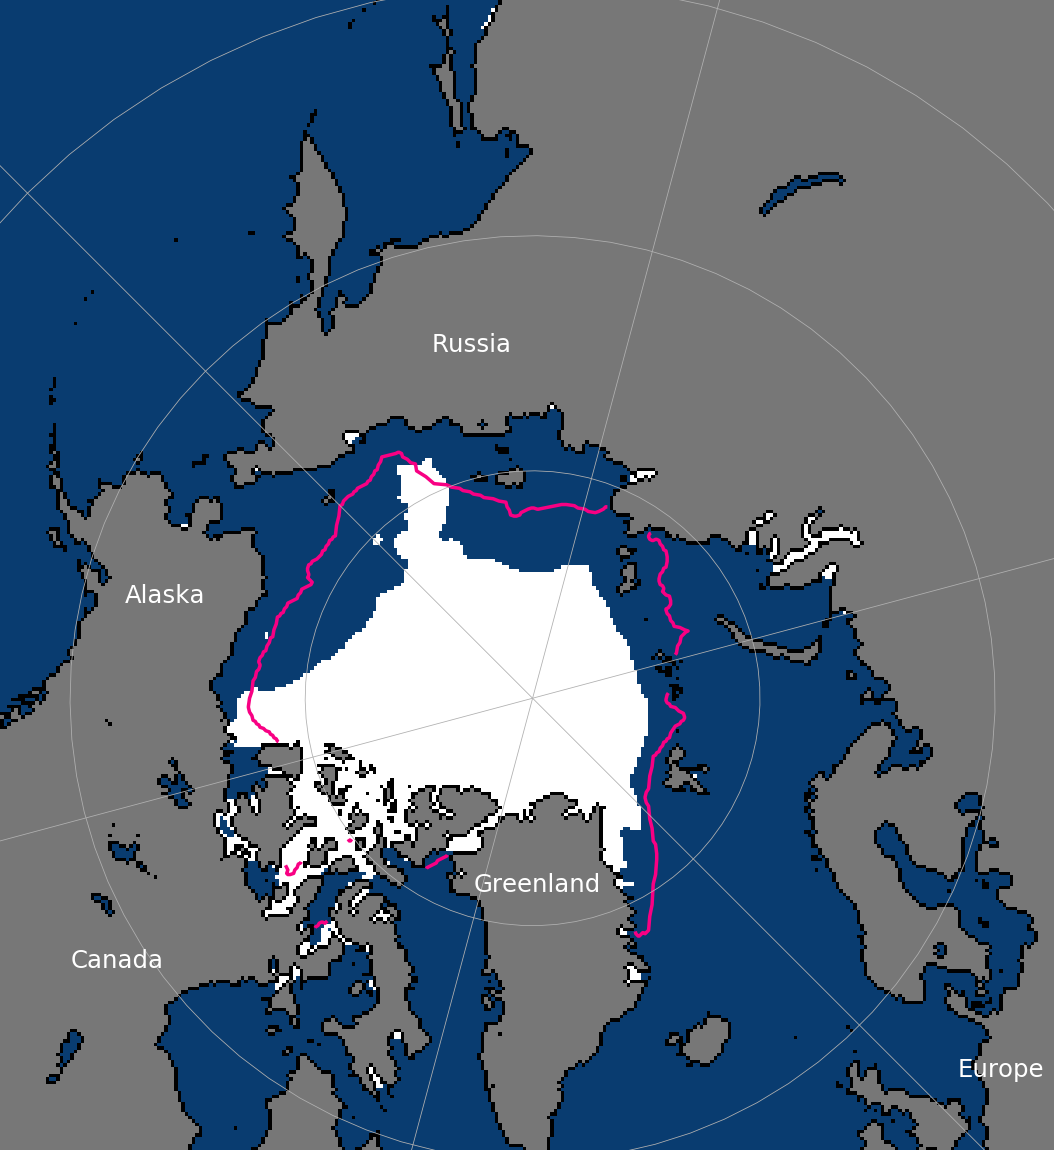 What do we know about the future of Arctic sea-ice loss?